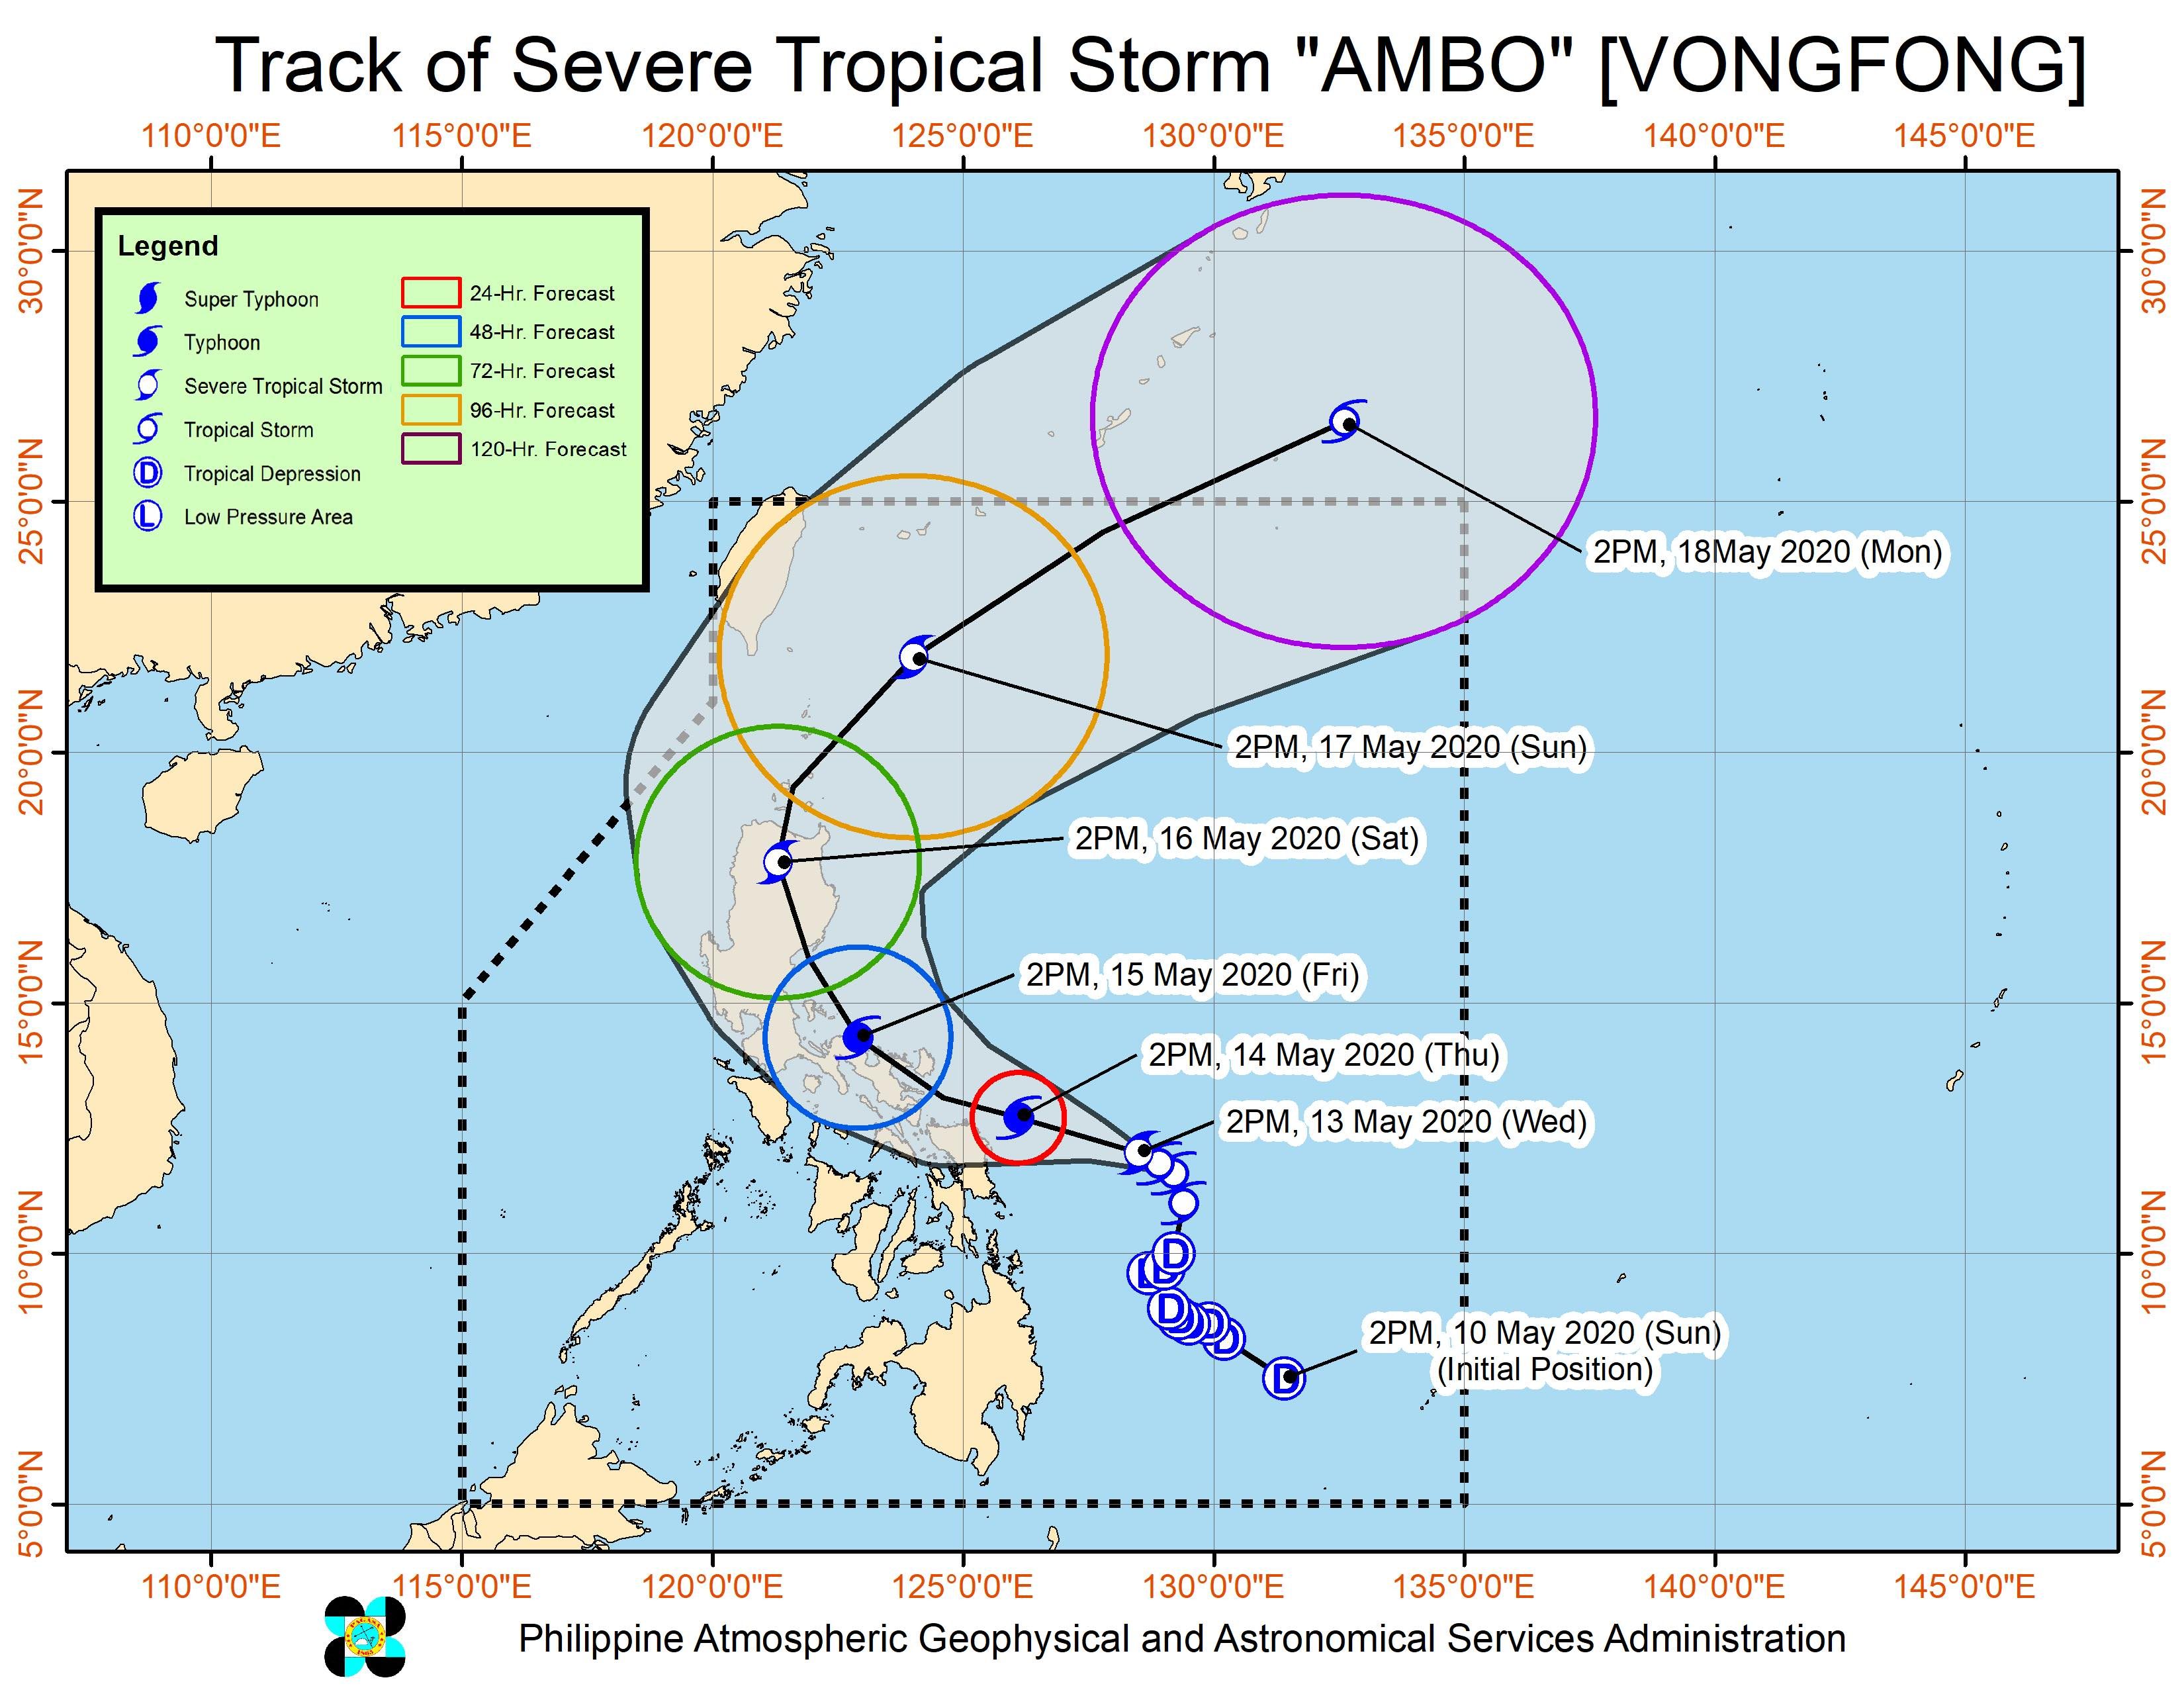 Forecast track of Severe Tropical Storm Ambo (Vongfong) as of May 13, 2020, 5 pm. Image from PAGASA 